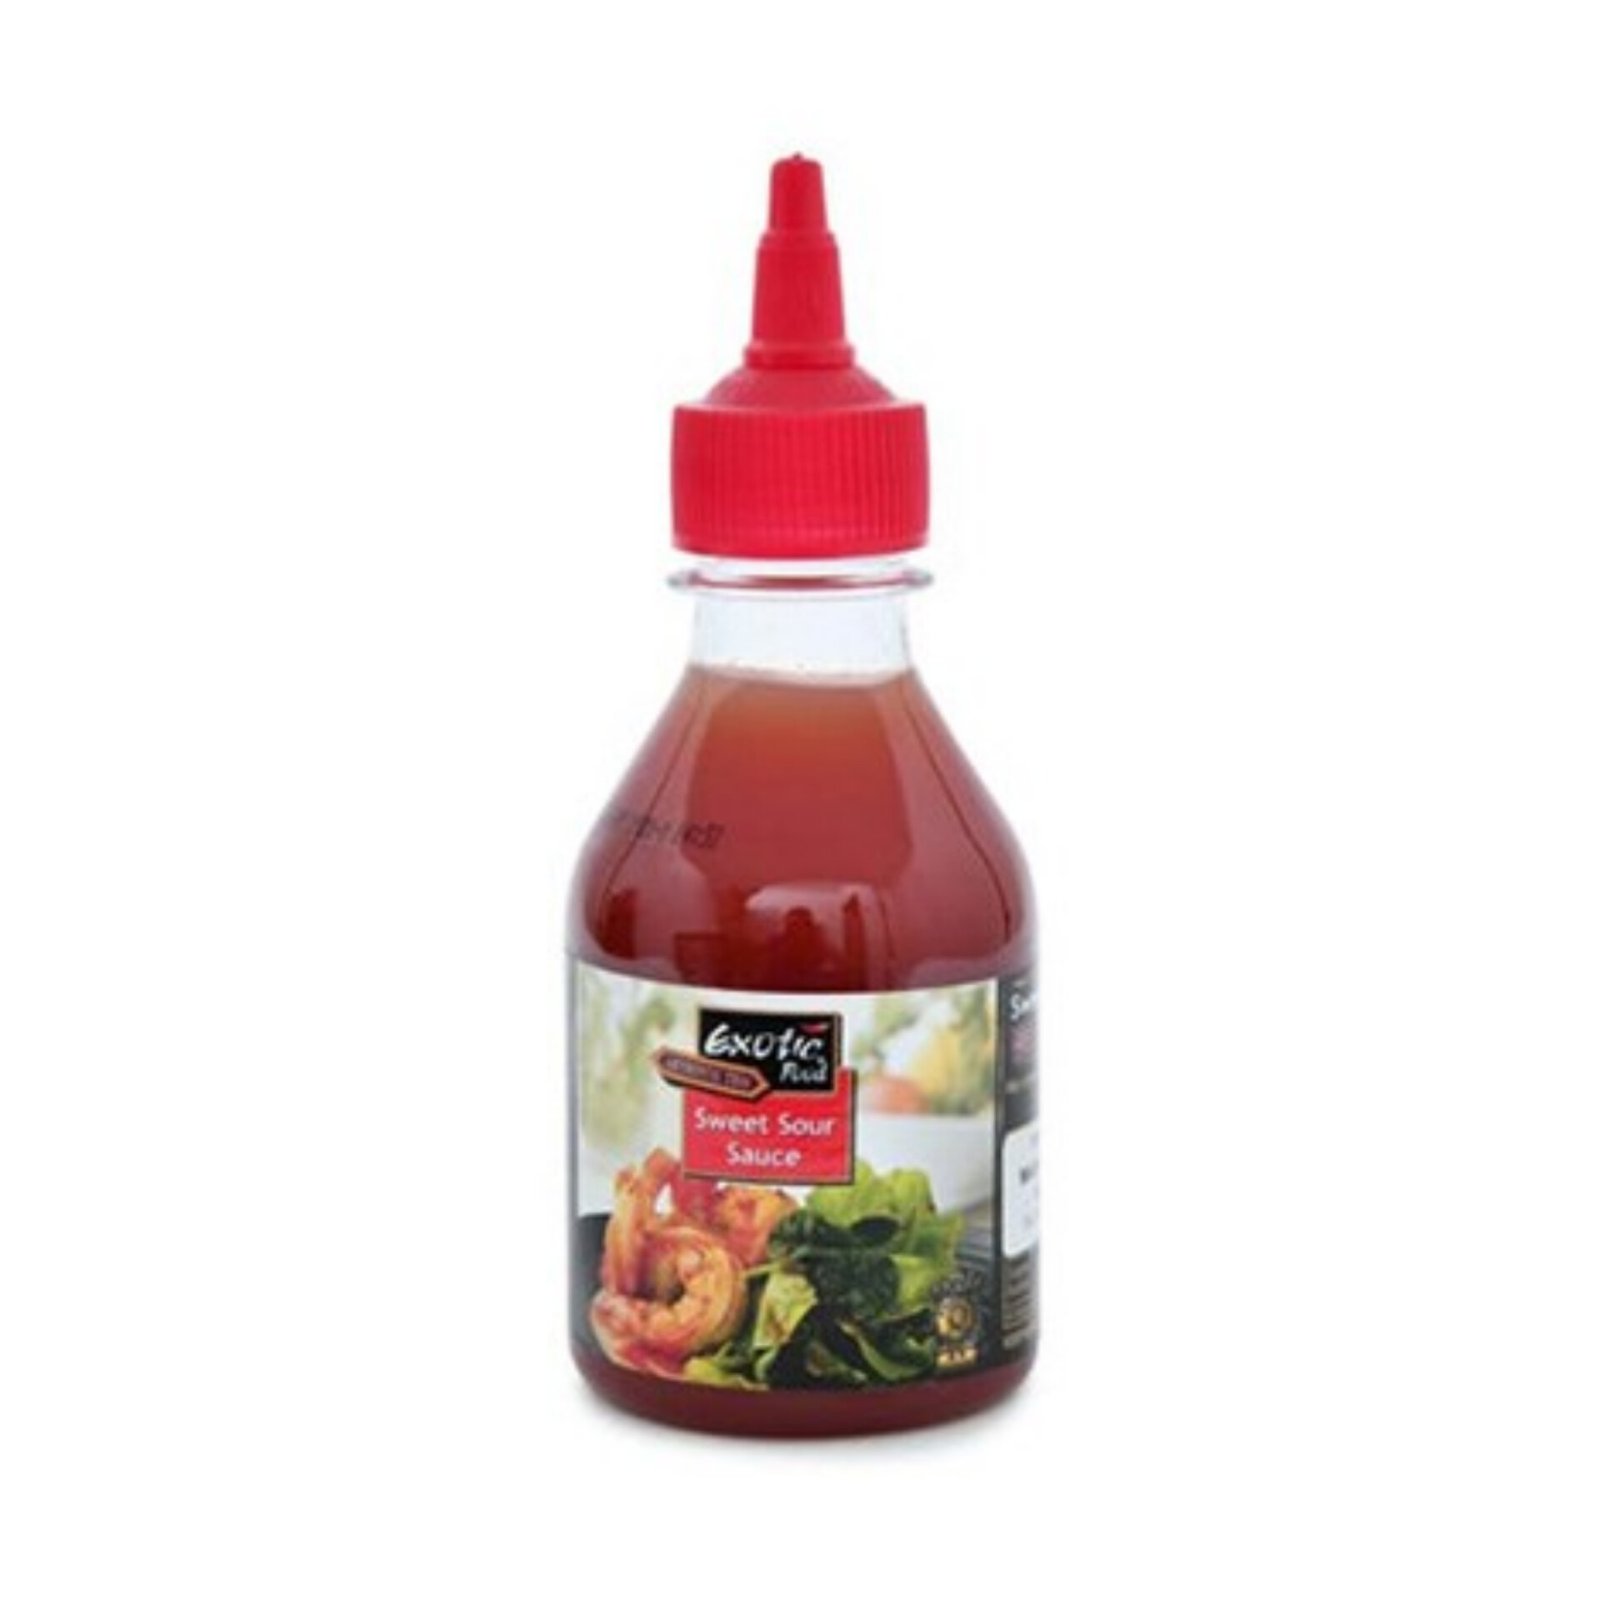 Exotic Food Sweet Sour sauce 200 ml